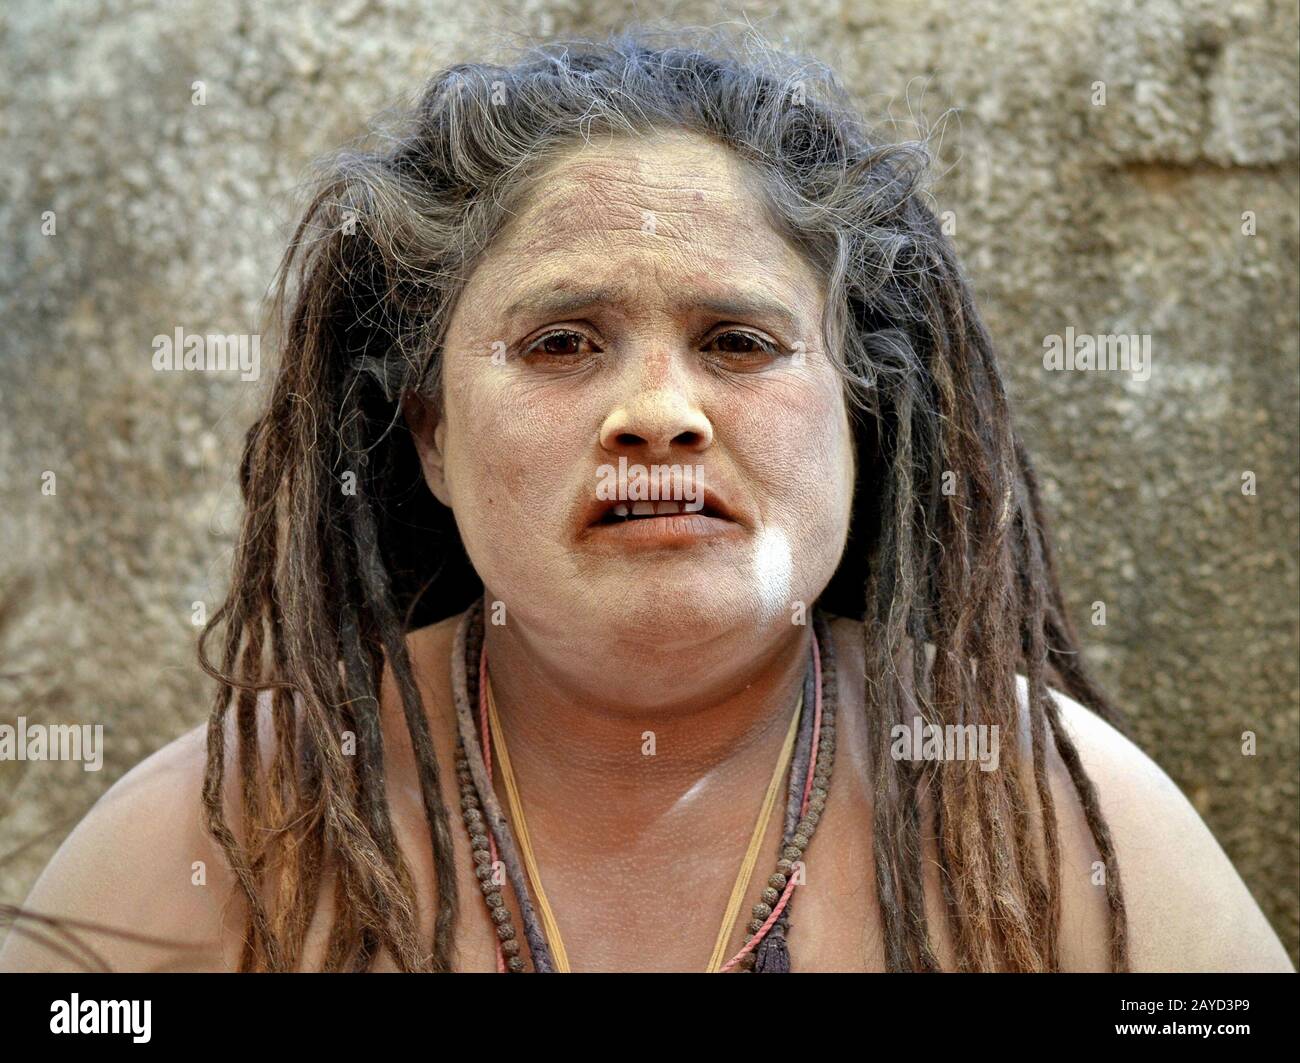 Chubby Indian Hindu female sadhu (sadhvi) with long dreadlocks and sacred ash (vibhuti) on her face and shoulders poses for the camera. Stock Photo